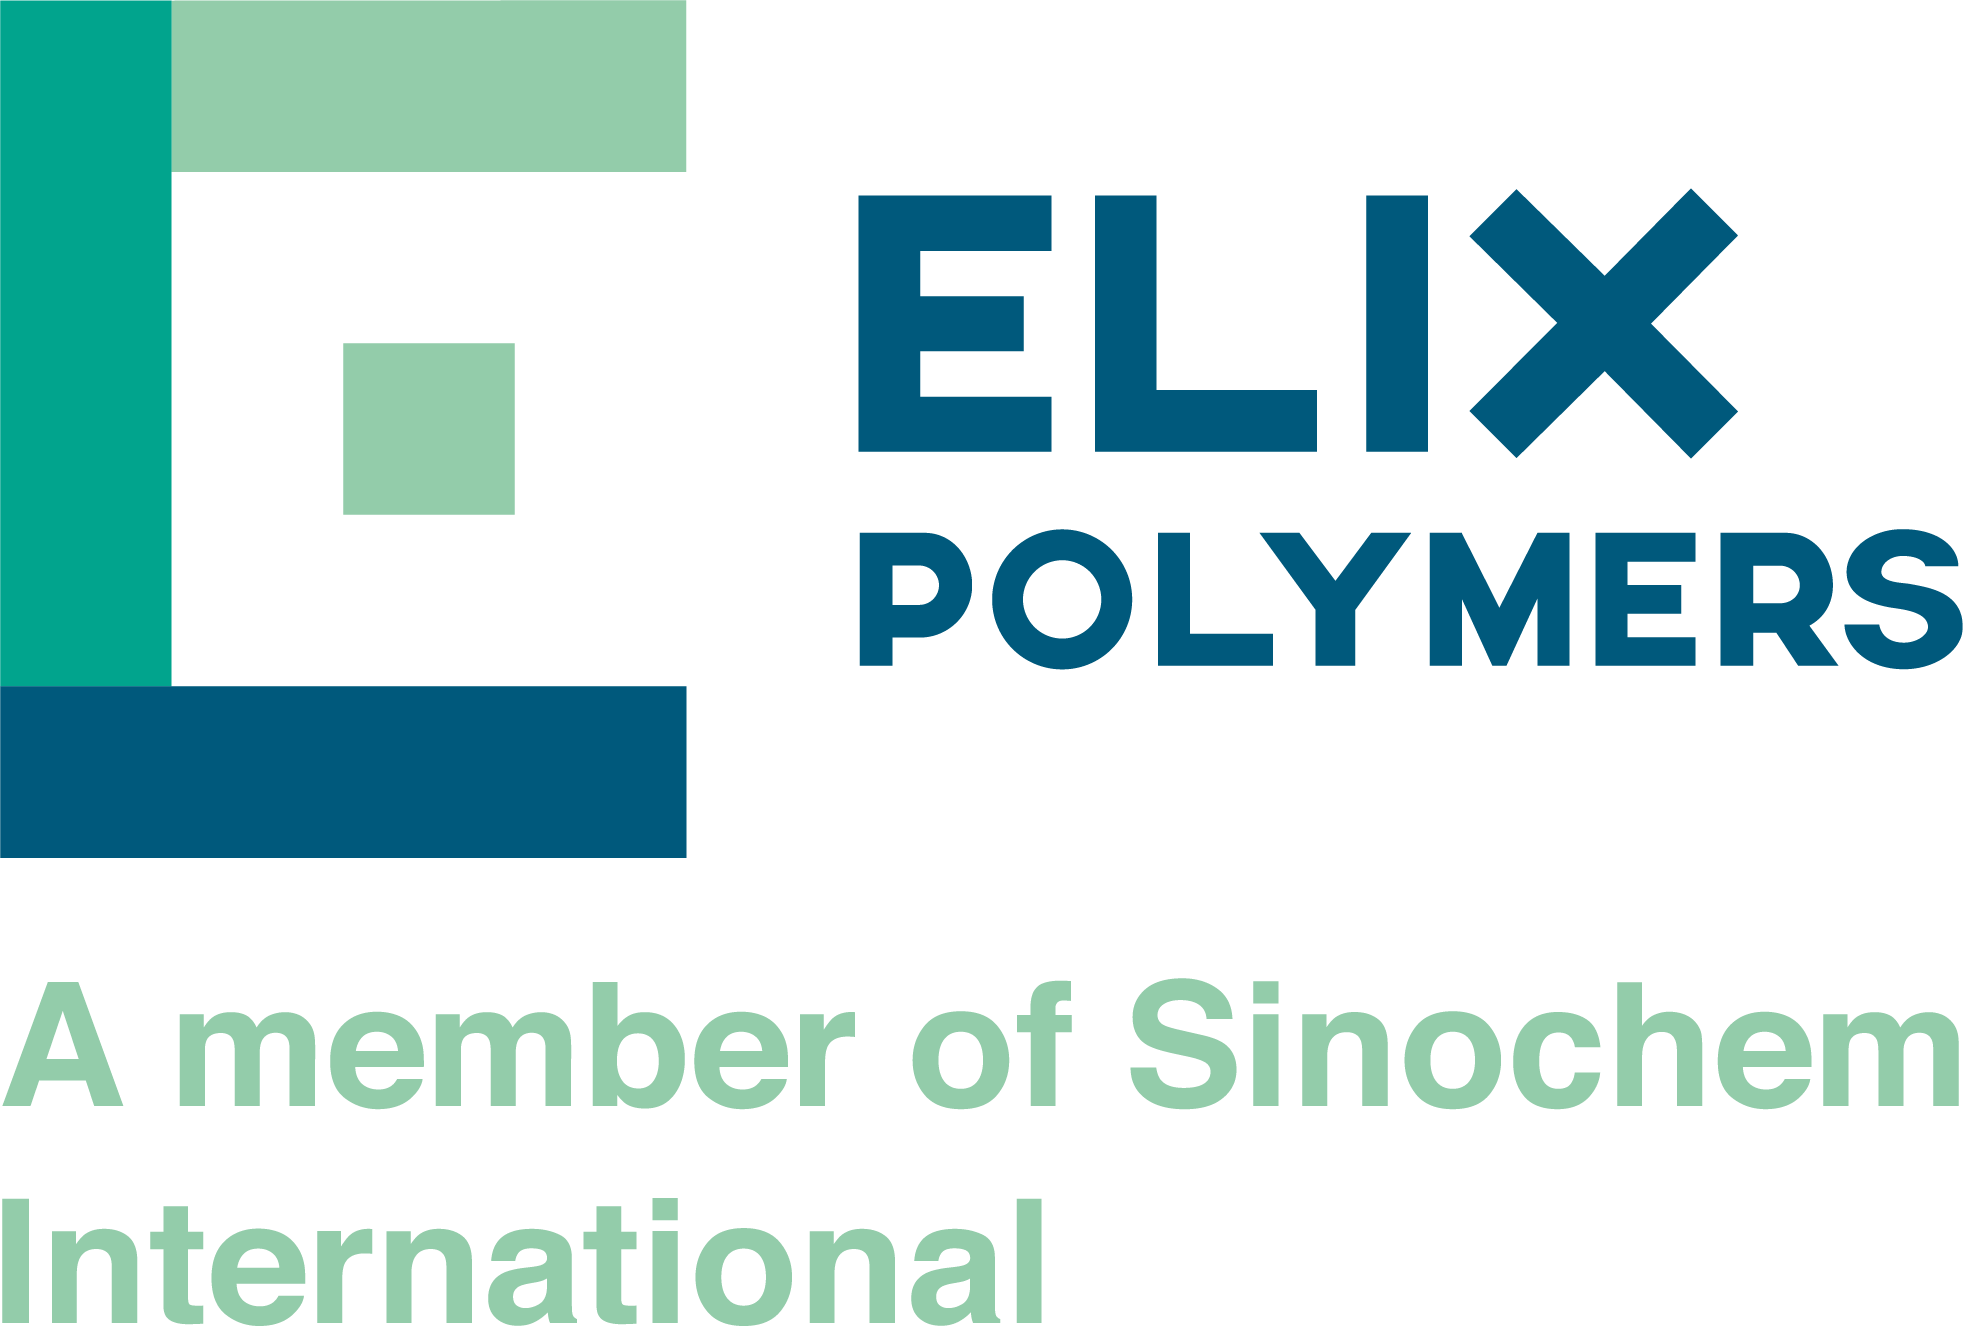 ELIX Polymers